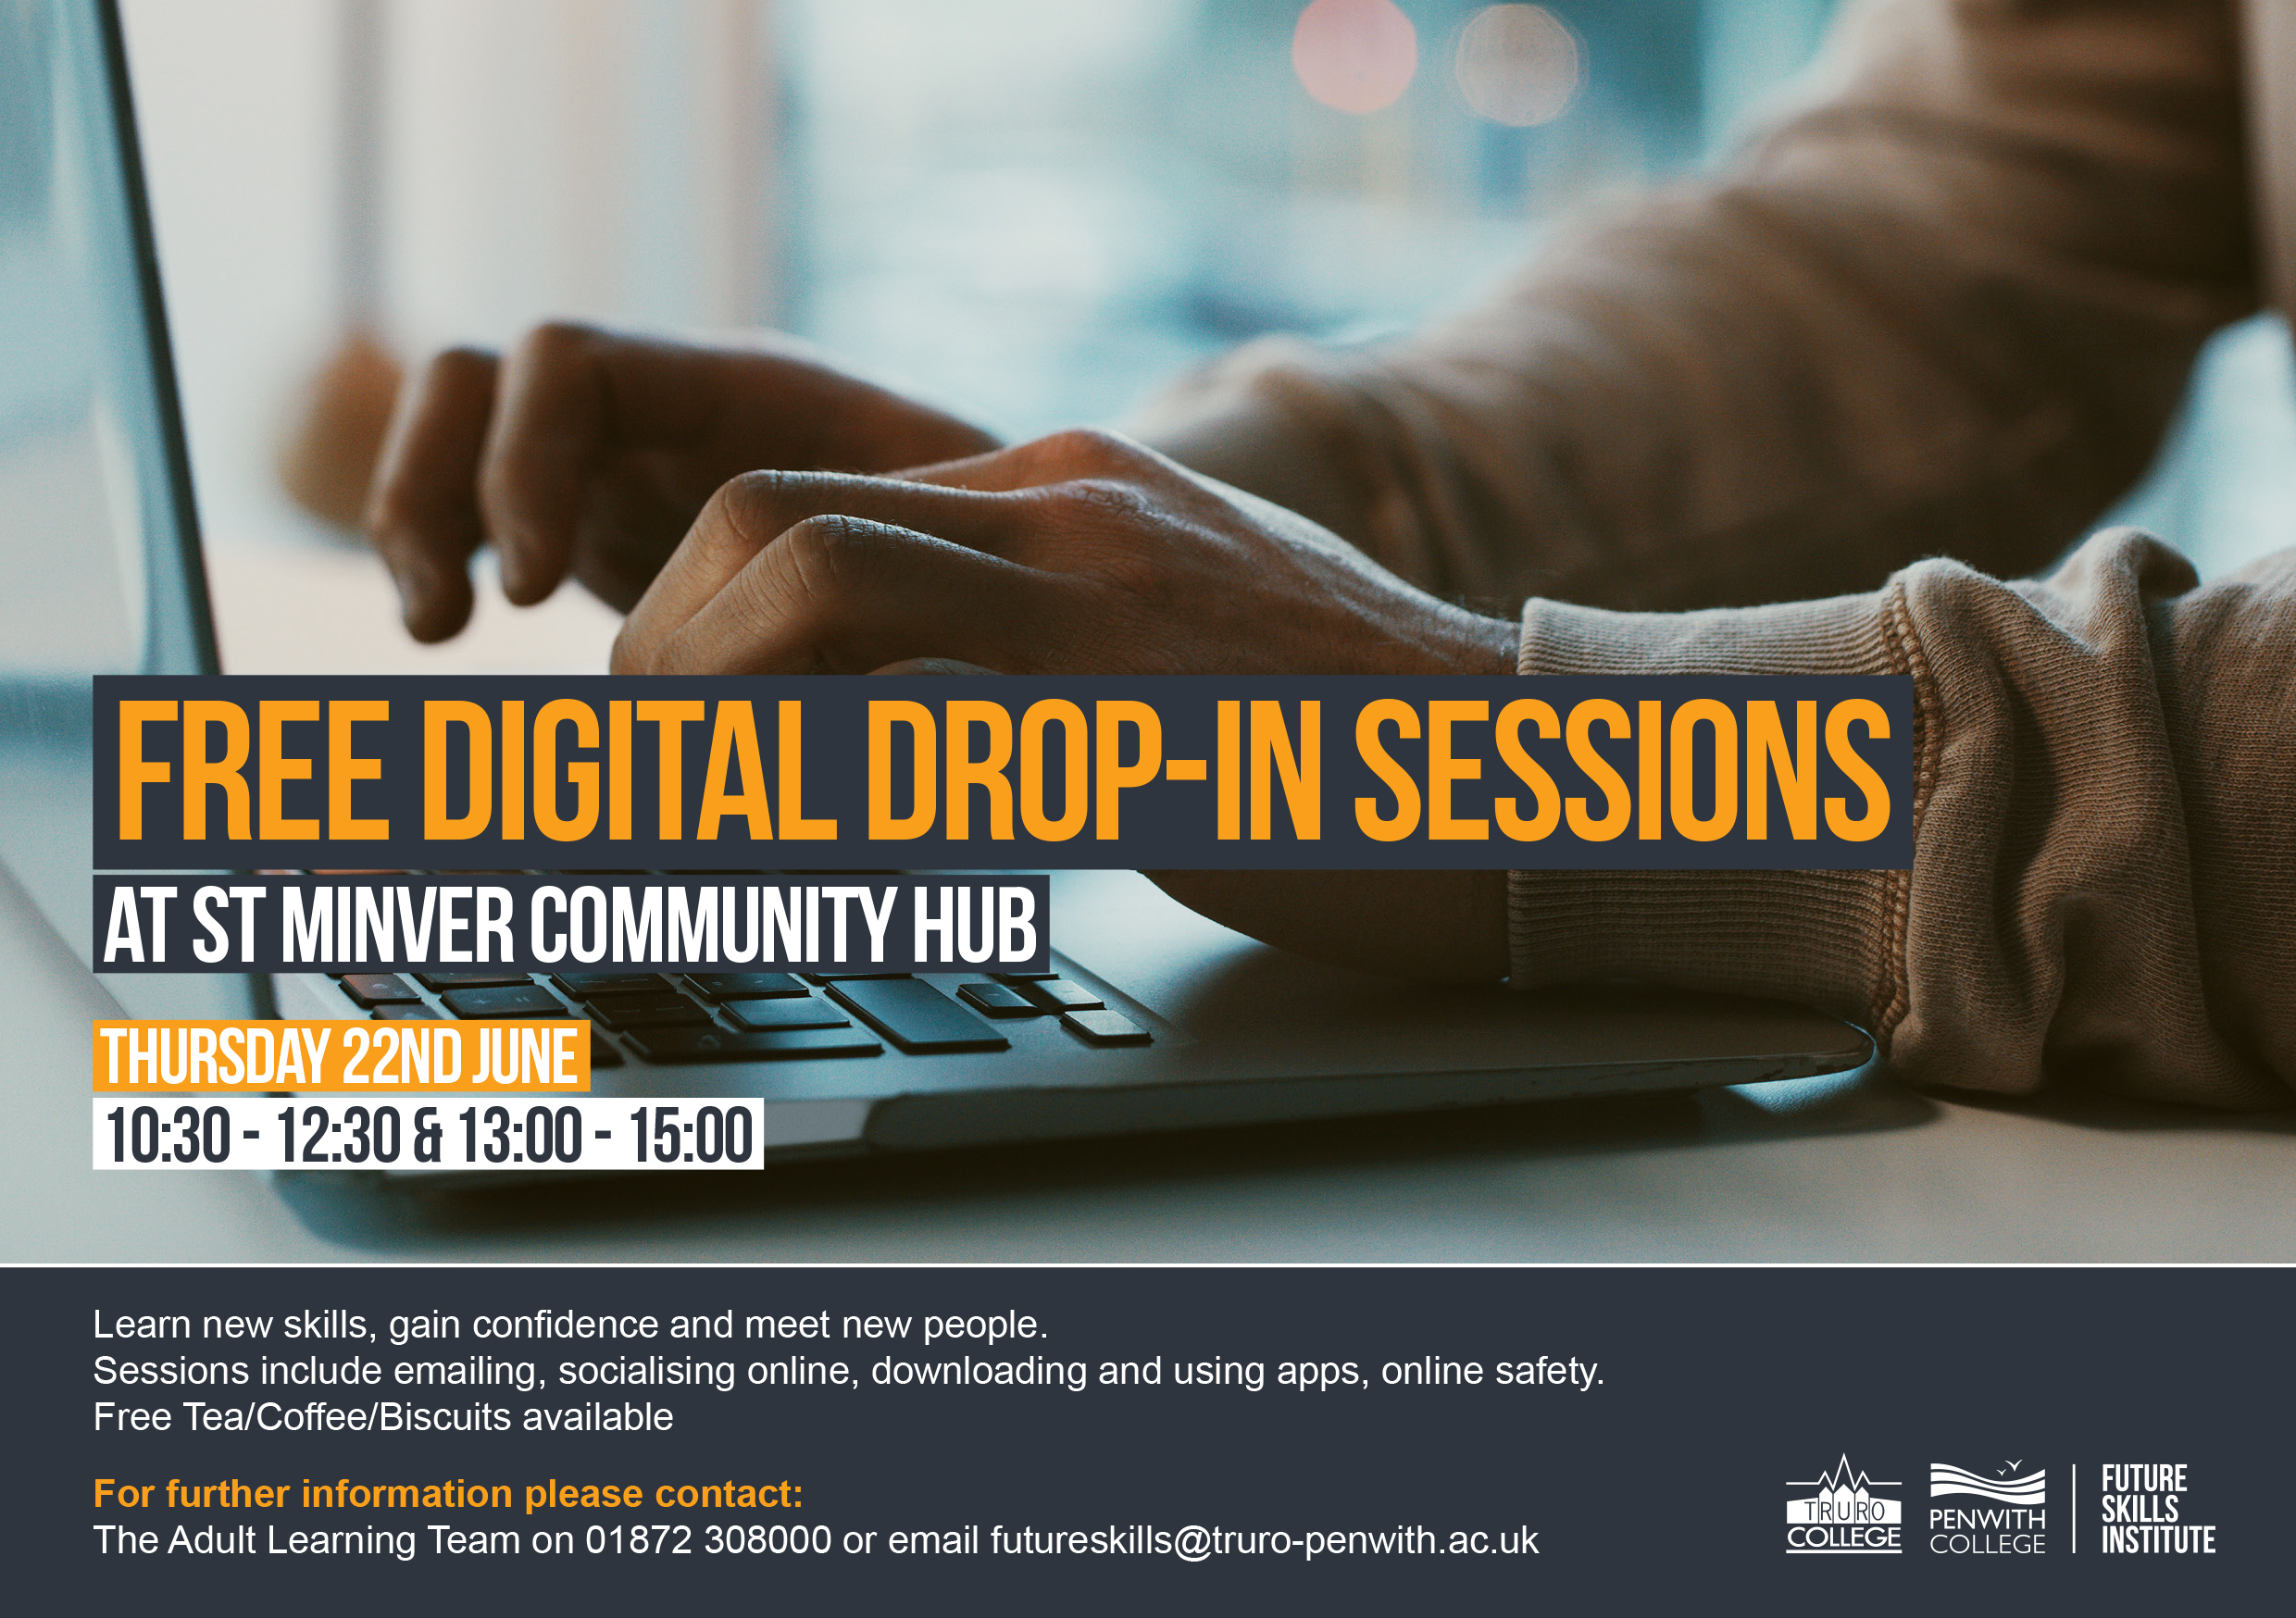 FREE Digital Drop-in Sessions